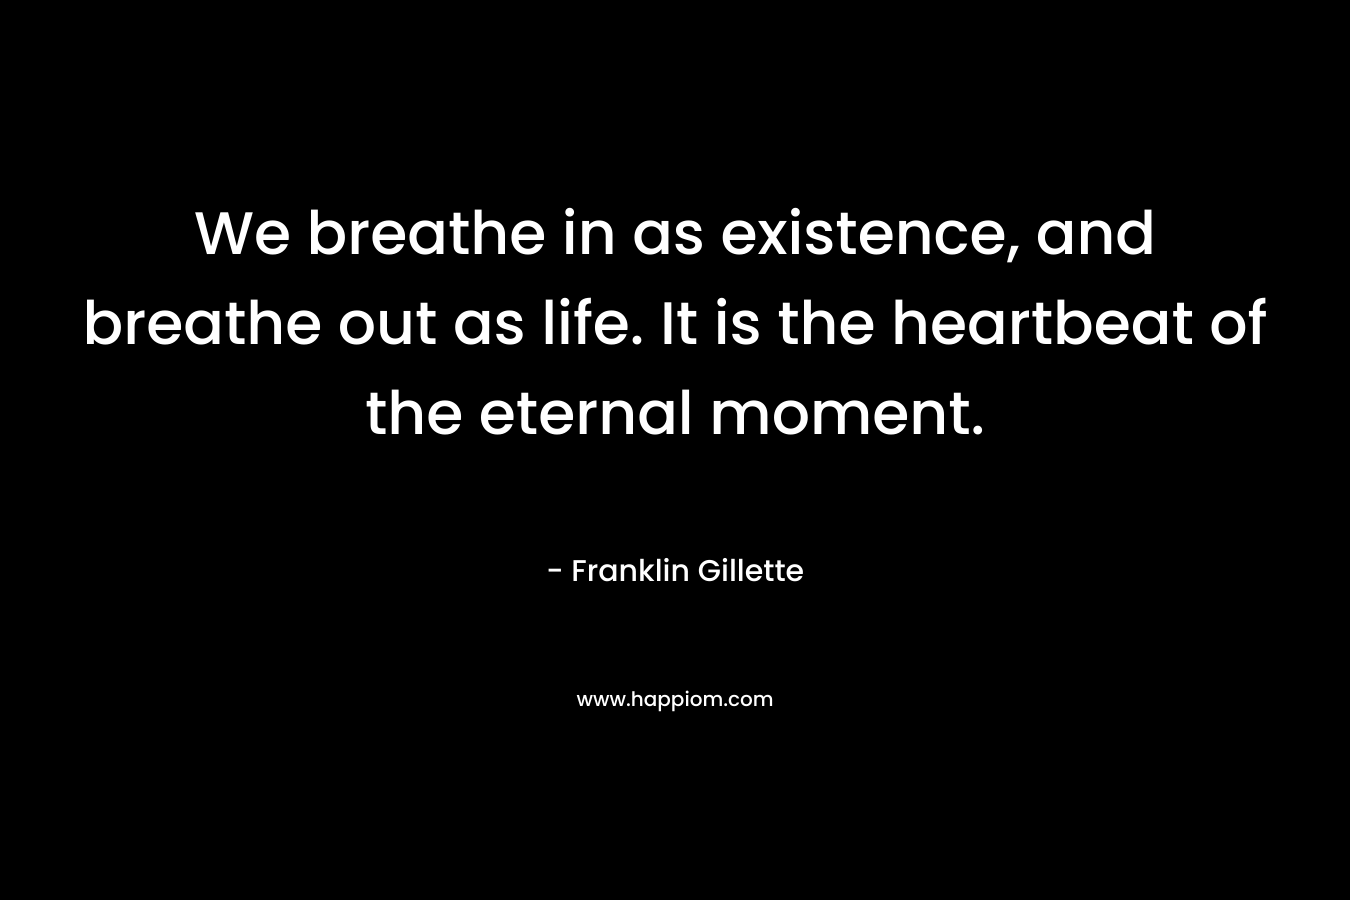 We breathe in as existence, and breathe out as life. It is the heartbeat of the eternal moment.